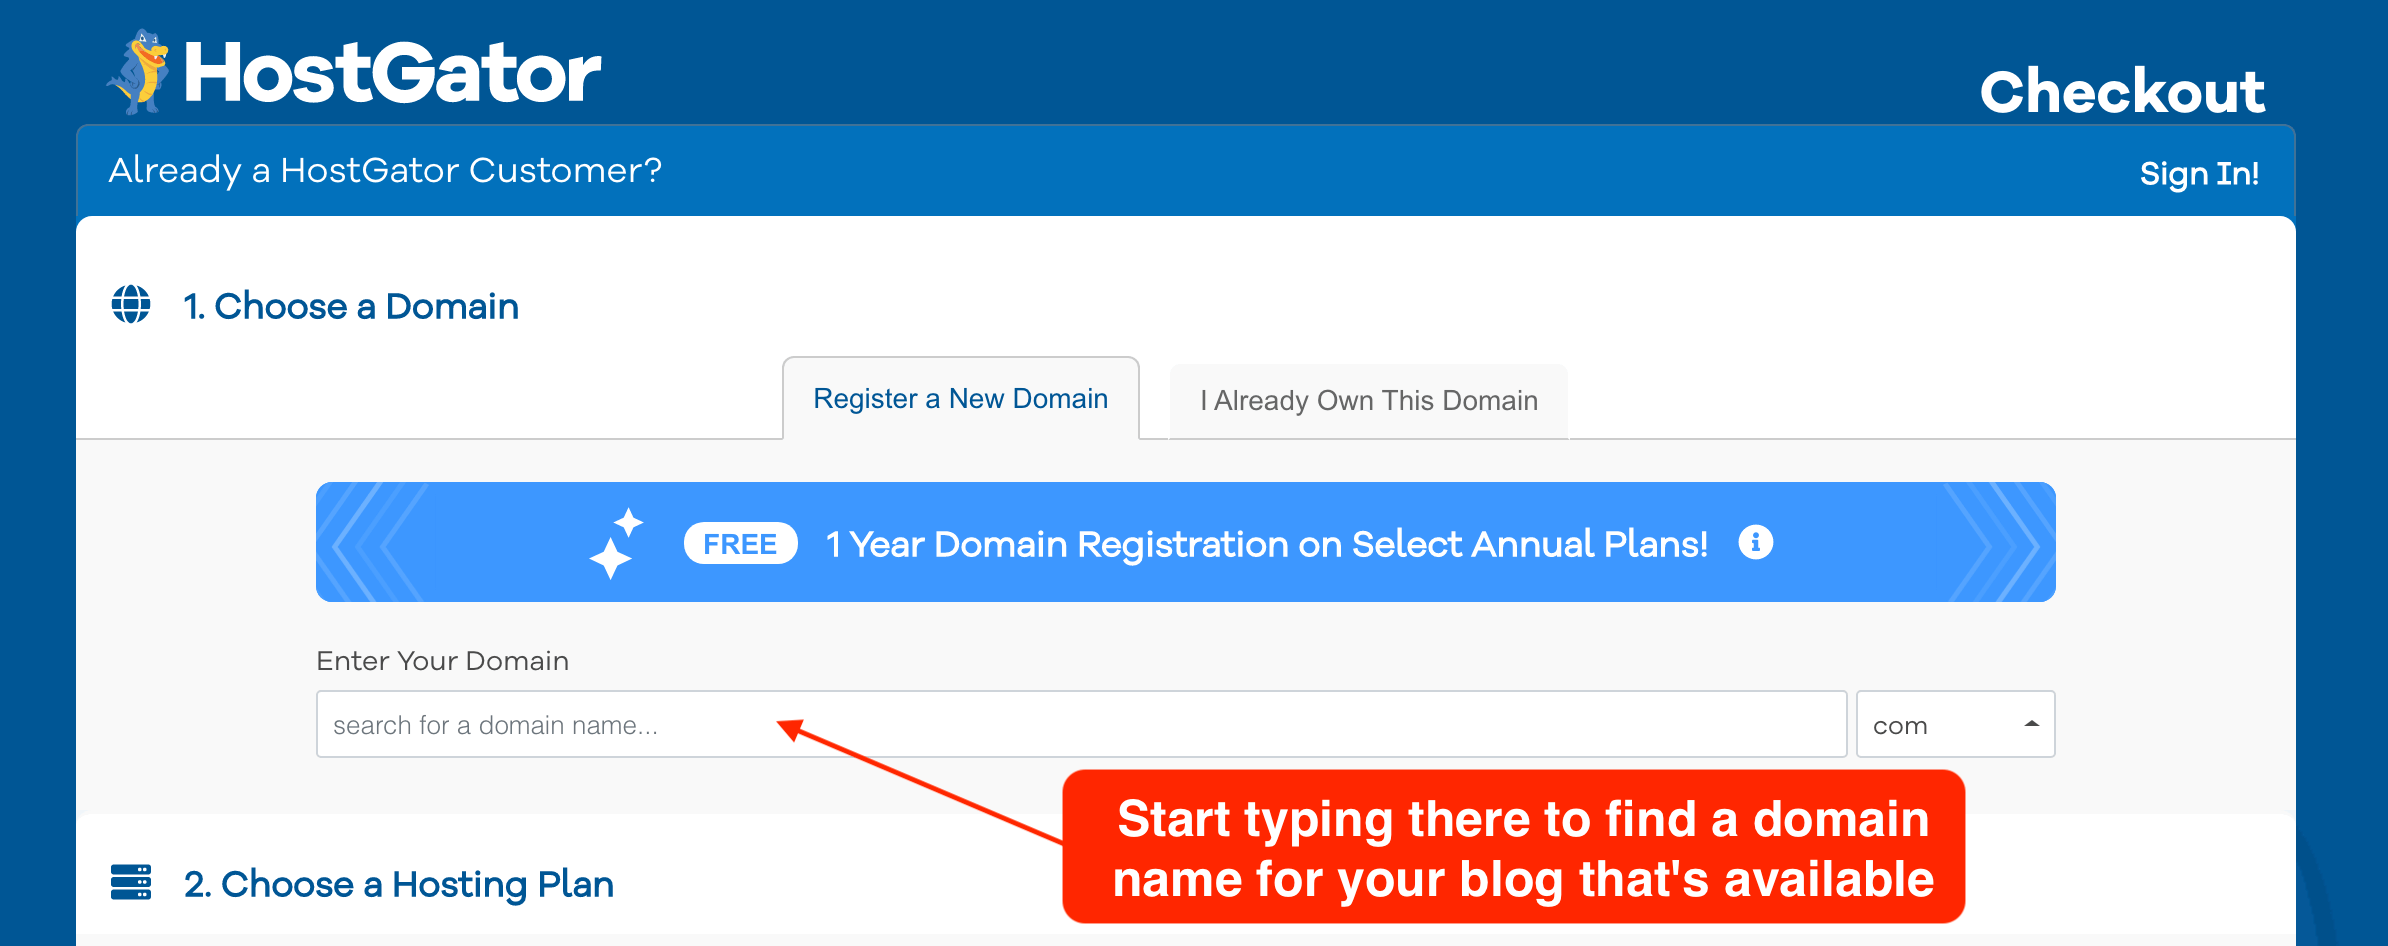 How to claim the free blog domain with HostGator